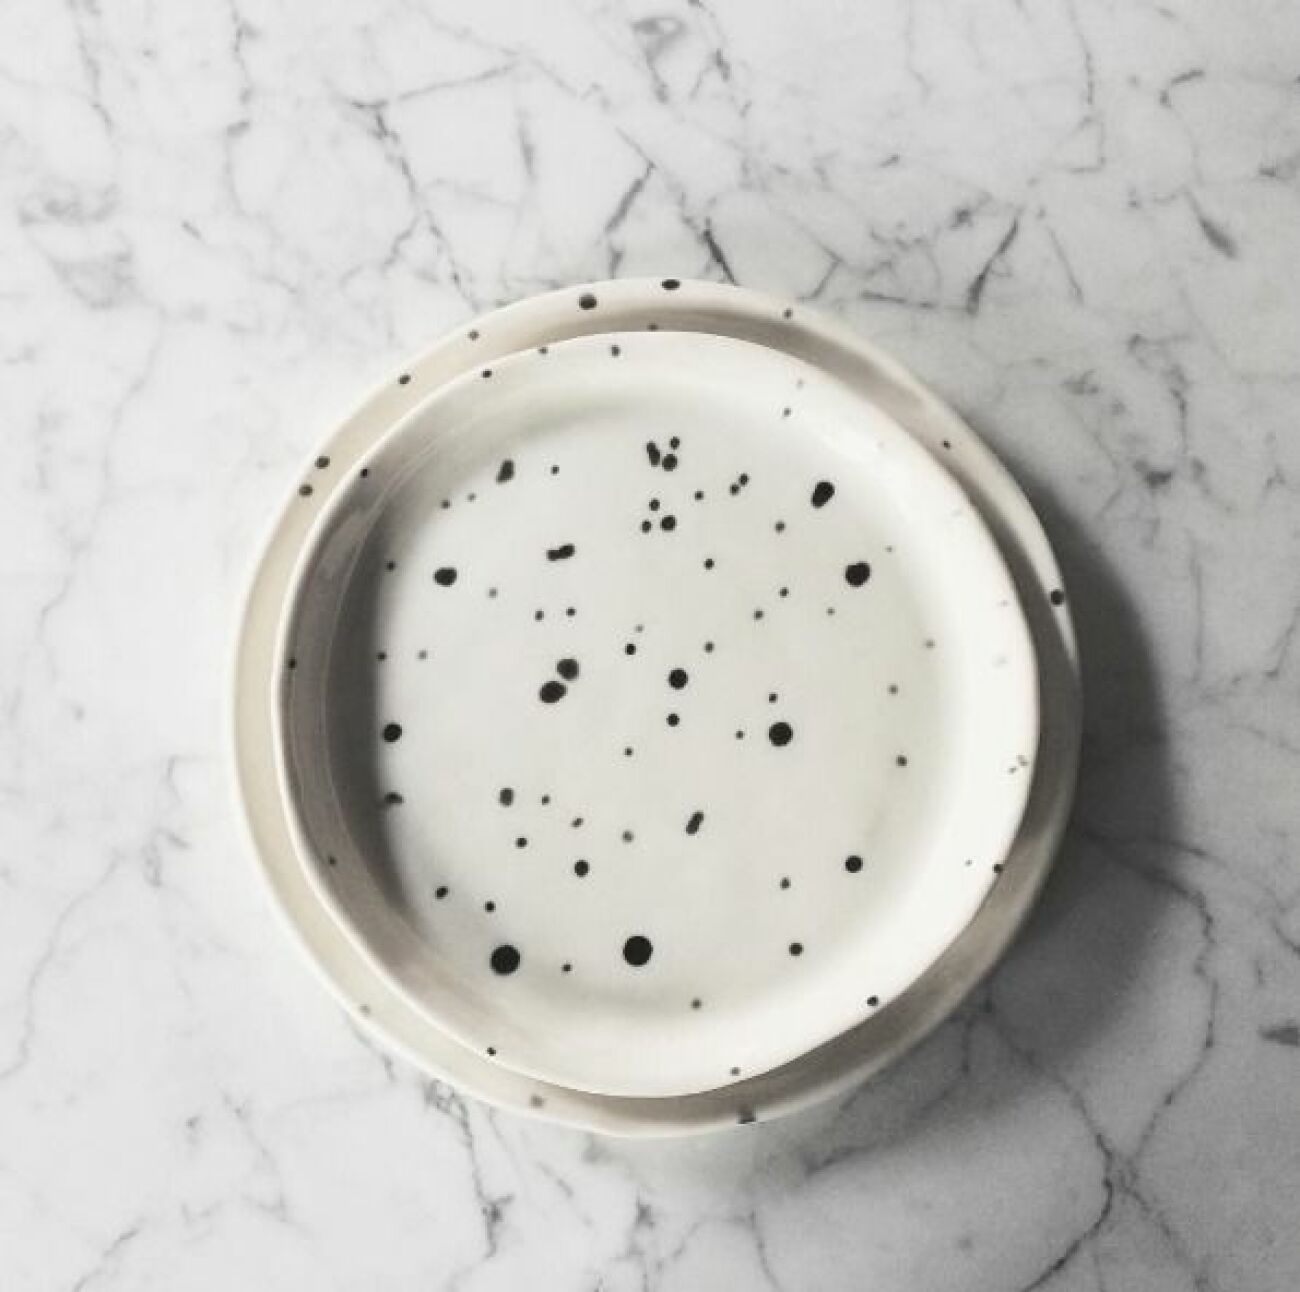 Sunday morning in the studio. Emptying the kiln that was loaded with a few of these darlings: Dalmatian. Porcelain dish with black dalmatian dots. Handmade by me.